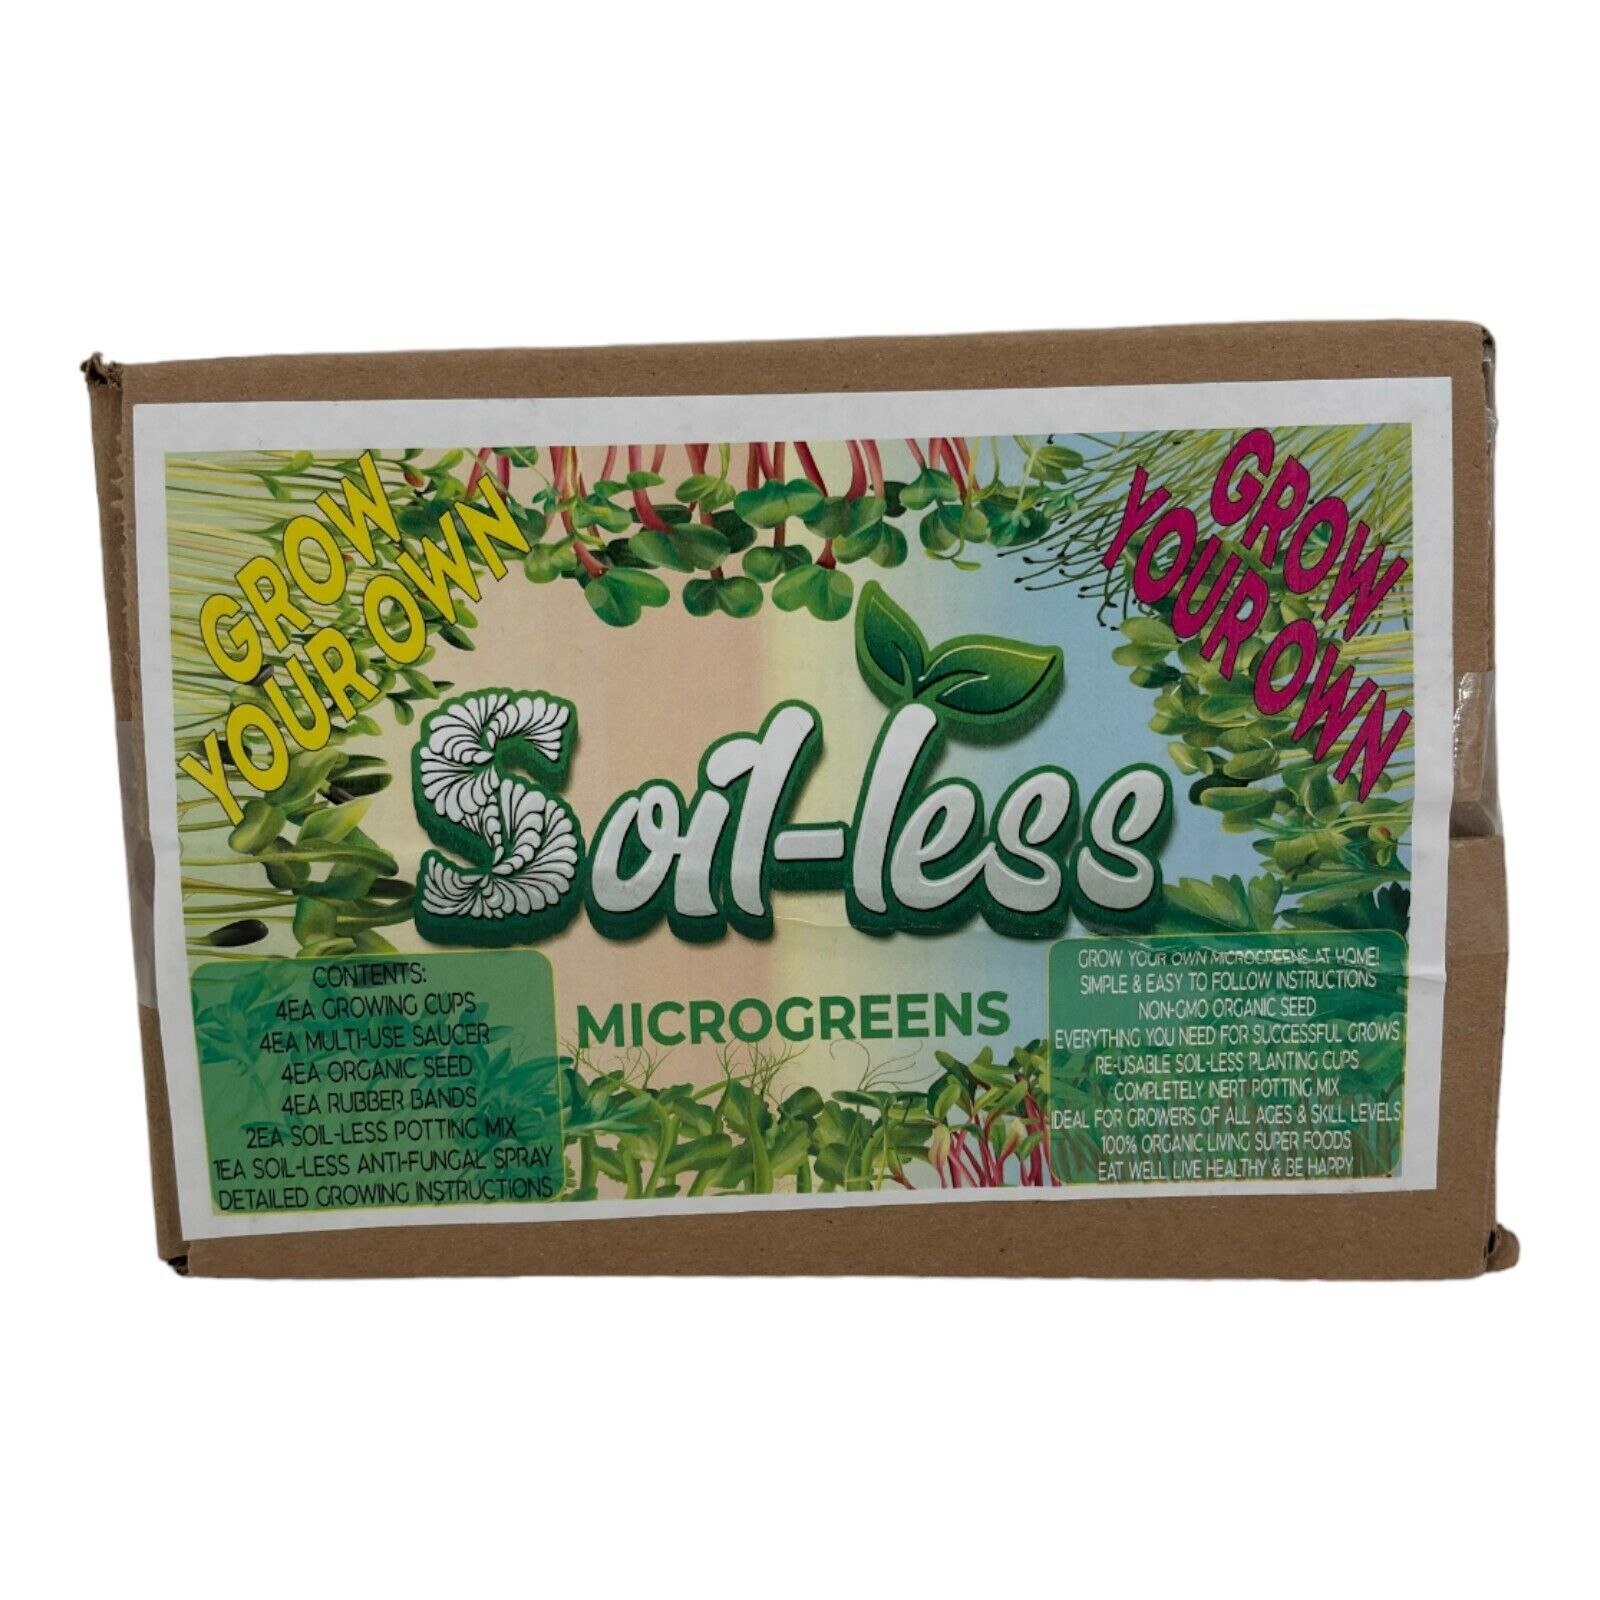 Soil-less Microgreens At Home Growing Kit Grow Your Own Greens Brand New Sealed